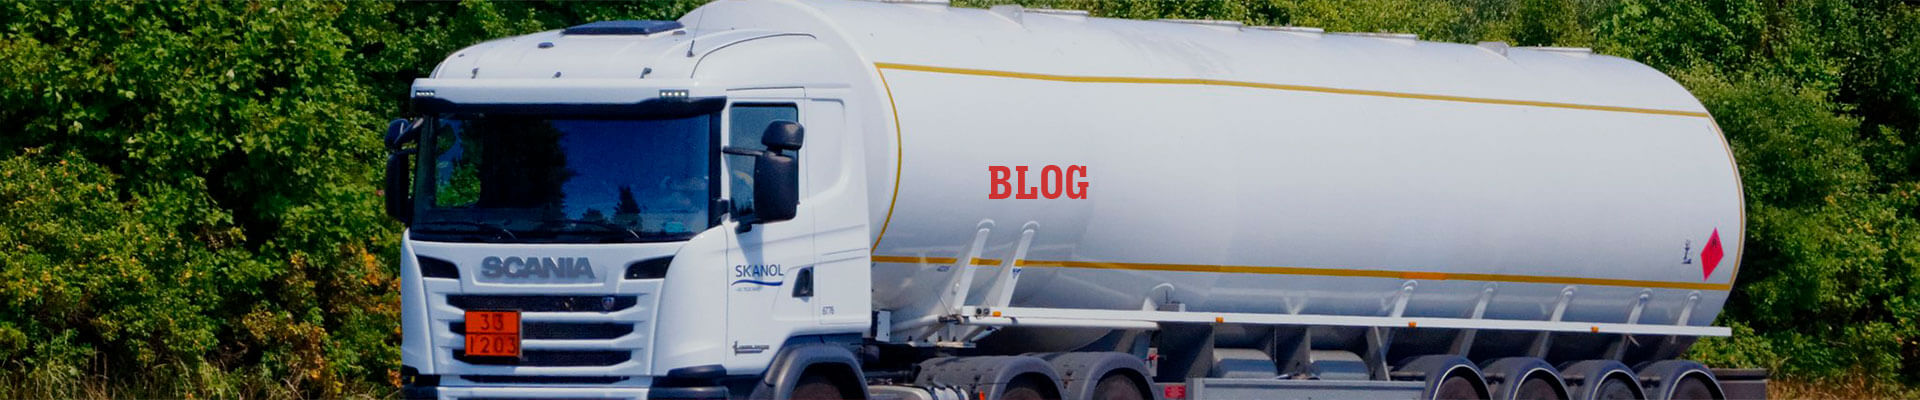 Road Tanker Safety: Design, Equipment, and the Human Factor